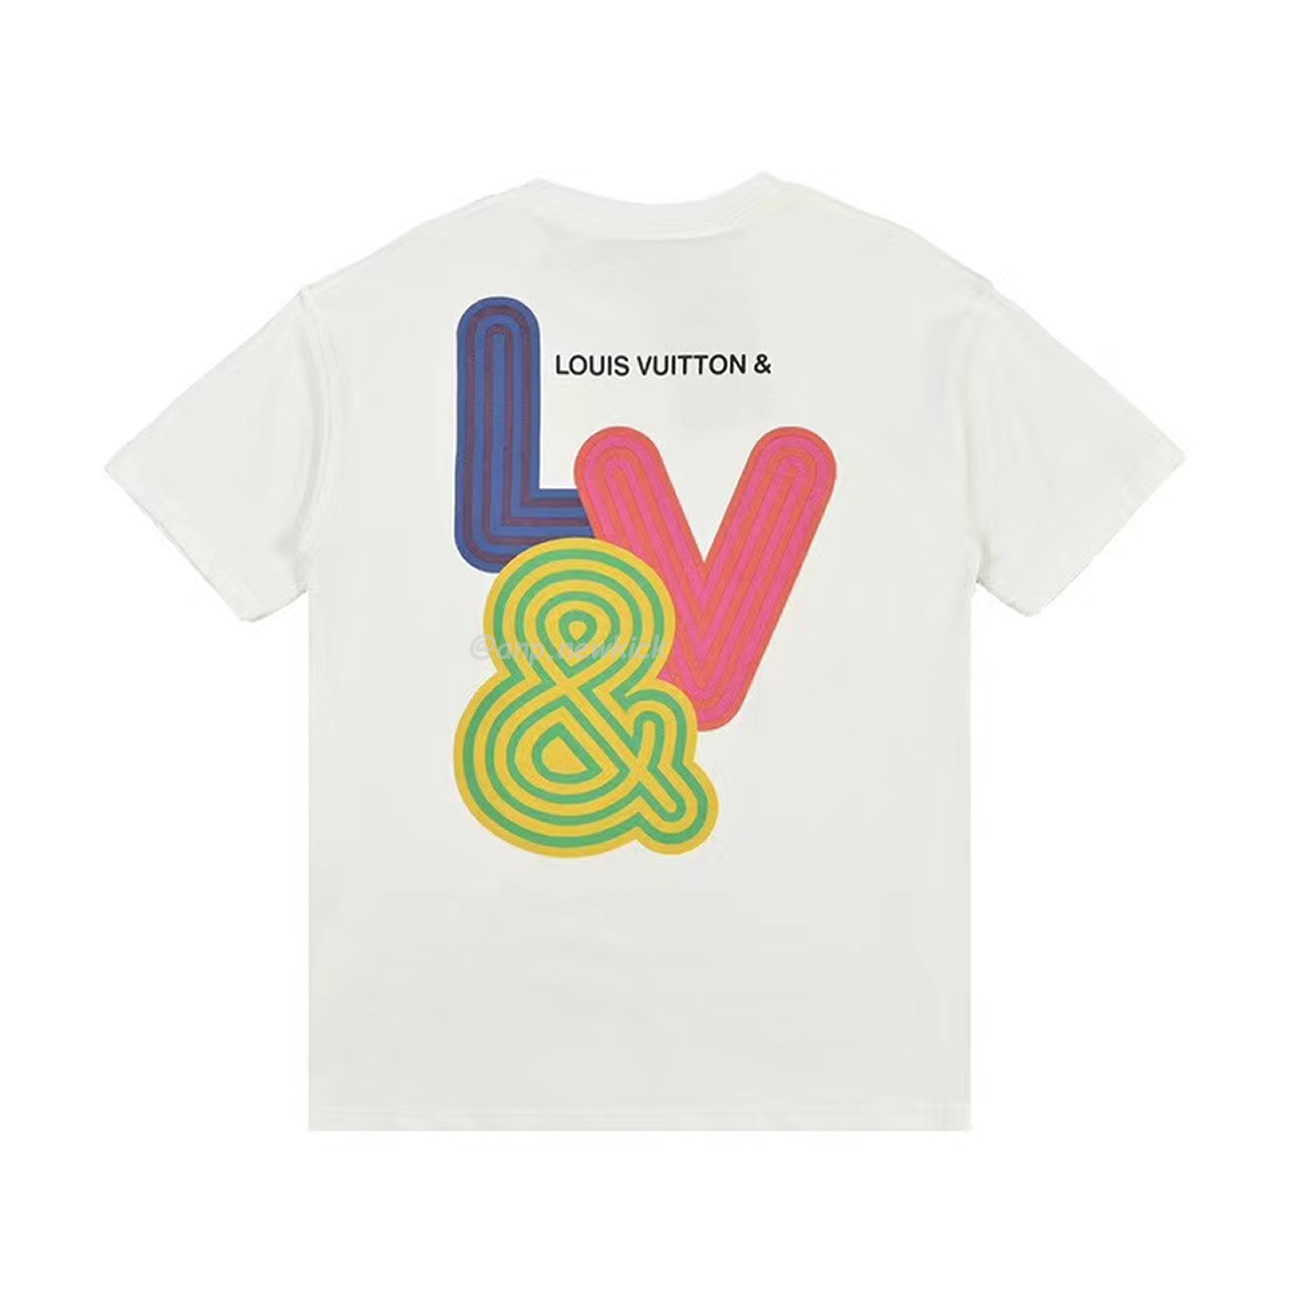 Louis Vuitton Colorful Letter Printed Short Sleeves T Shirt (8) - newkick.org